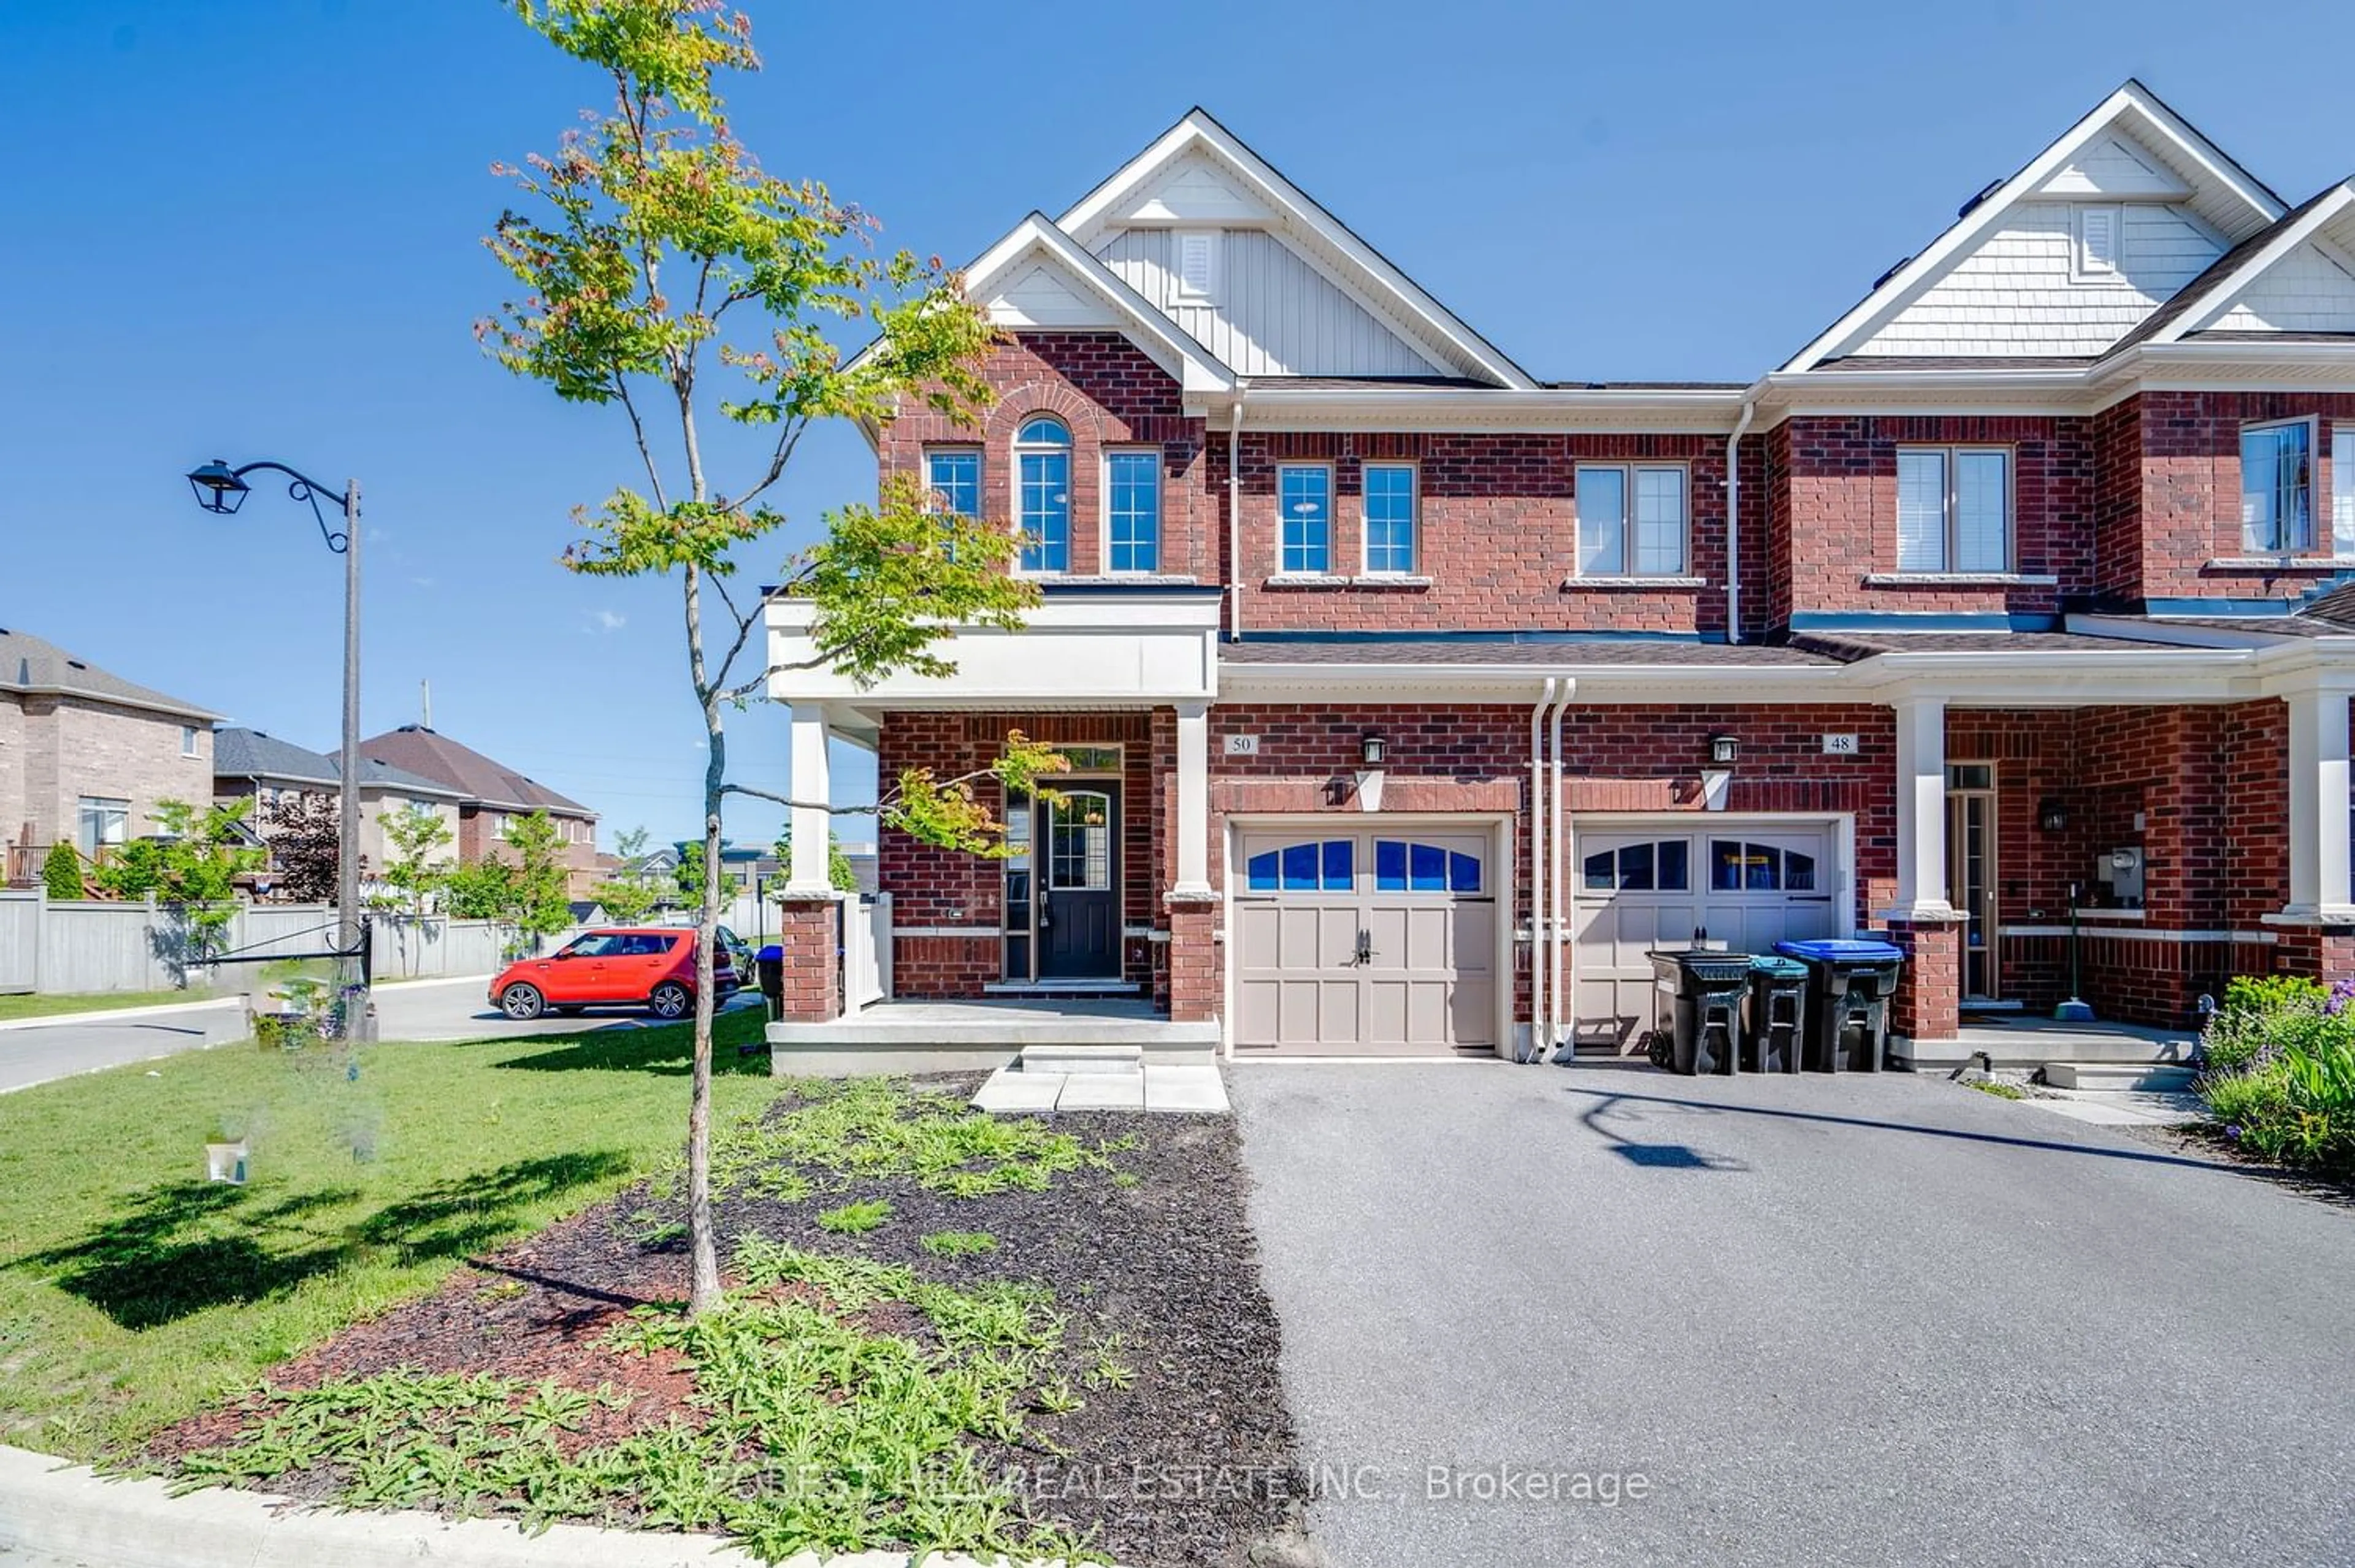 Home with brick exterior material for 50 Clifford Cres, New Tecumseth Ontario L0G 1W0